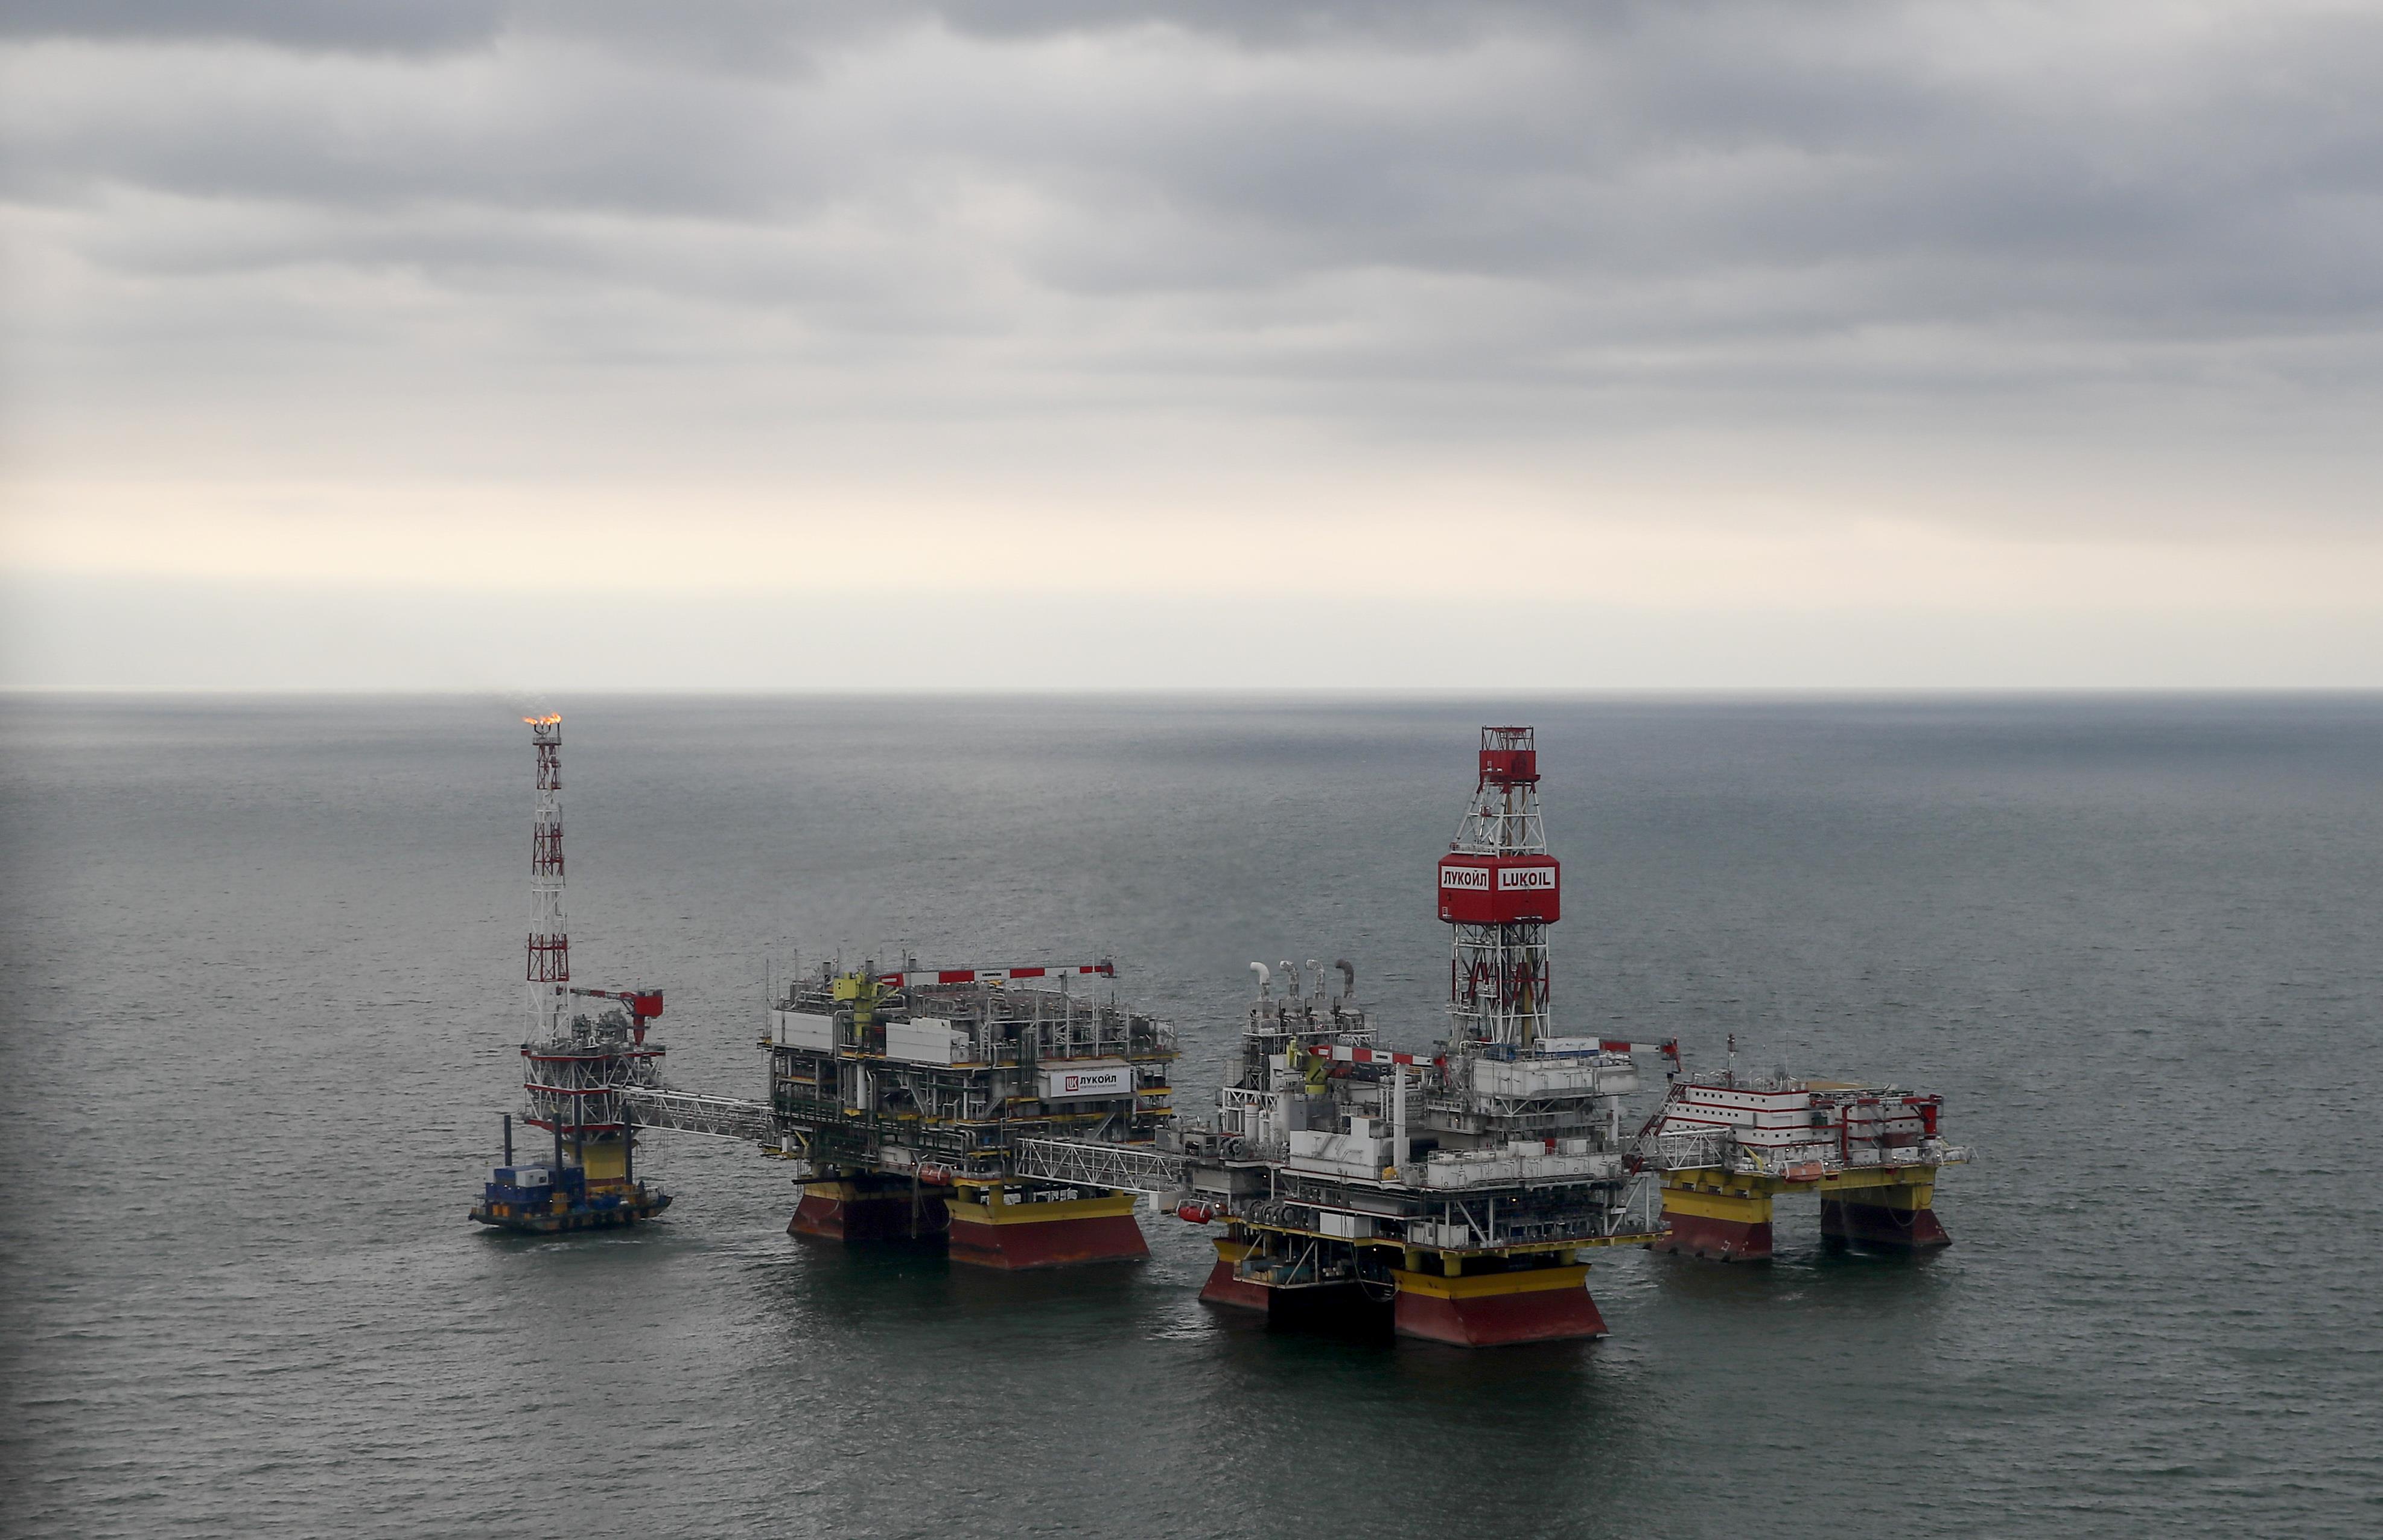 An oil platform operated by Lukoil company is seen at the Filanovskogo oil field in Caspian Sea